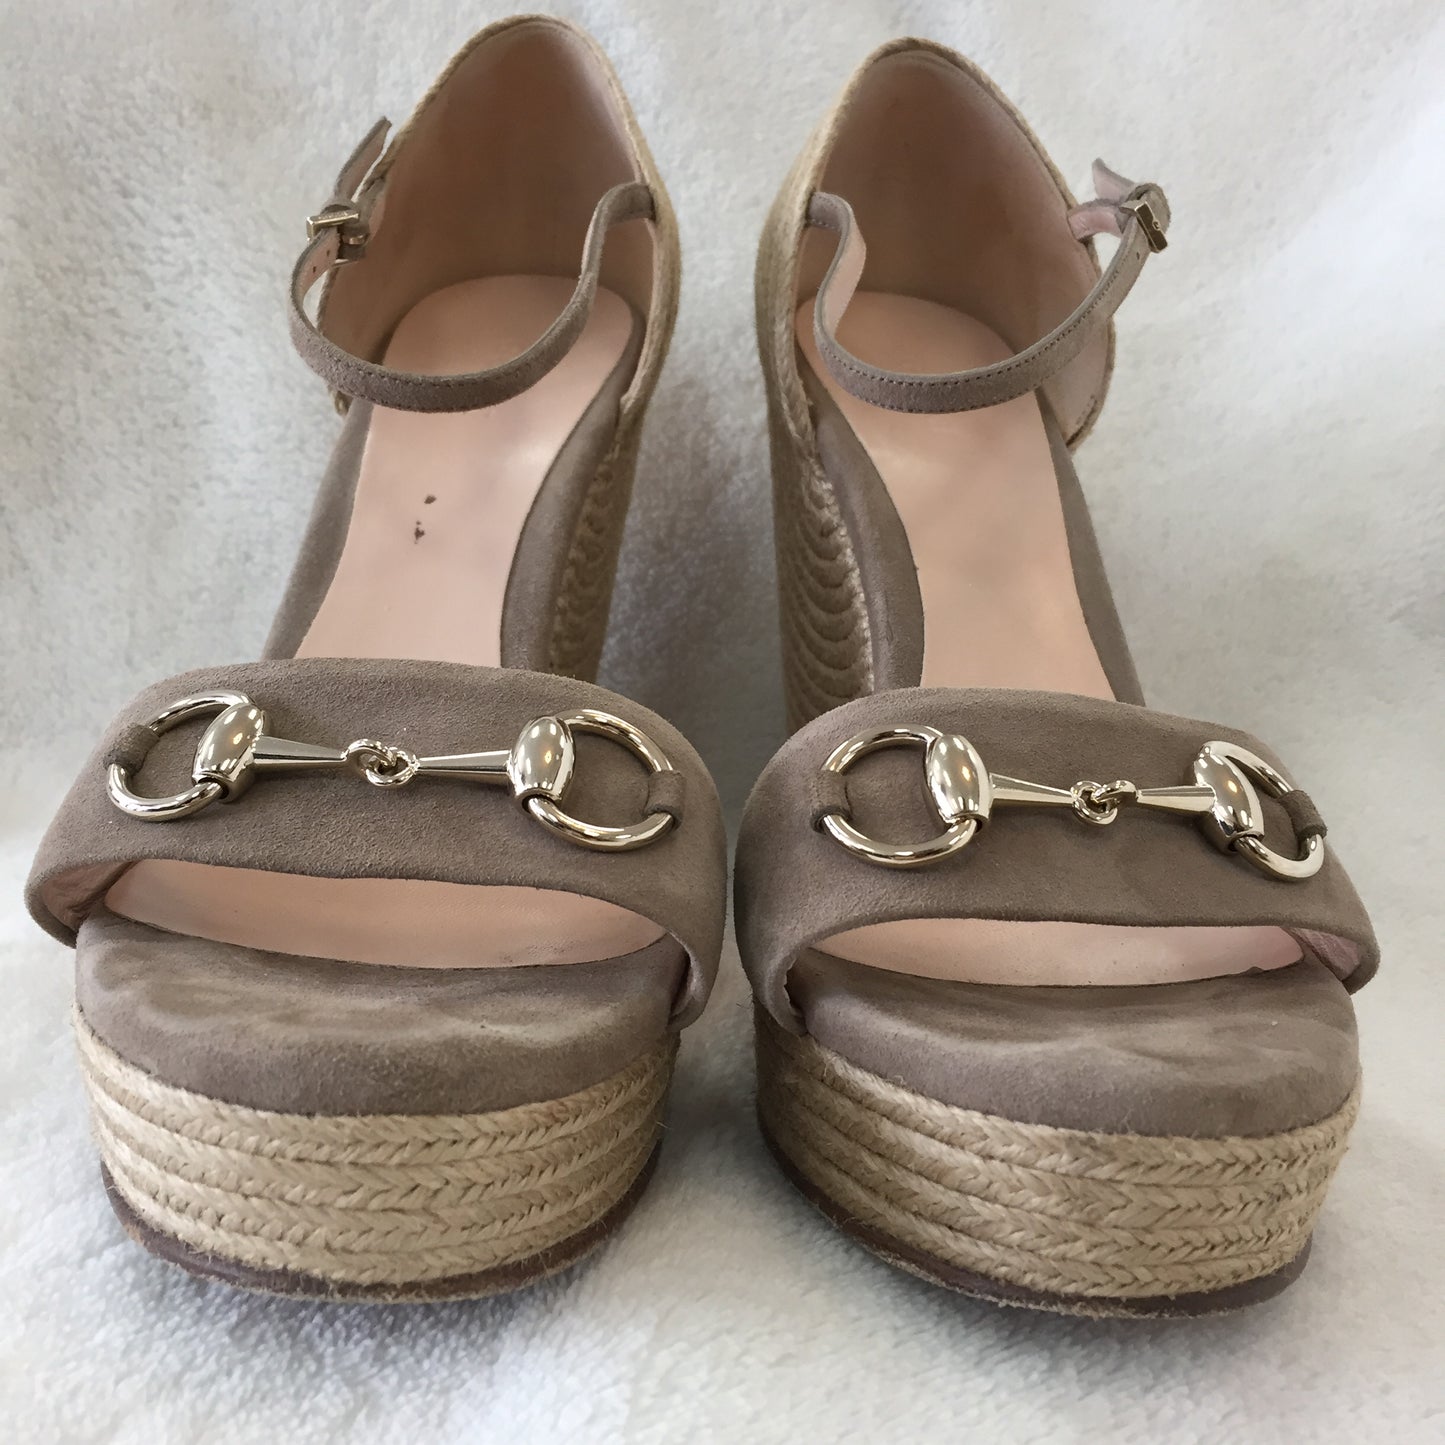 Authentic Gucci Taupe Horsebit Wedge Sandals Women's Size 40 / 9.5